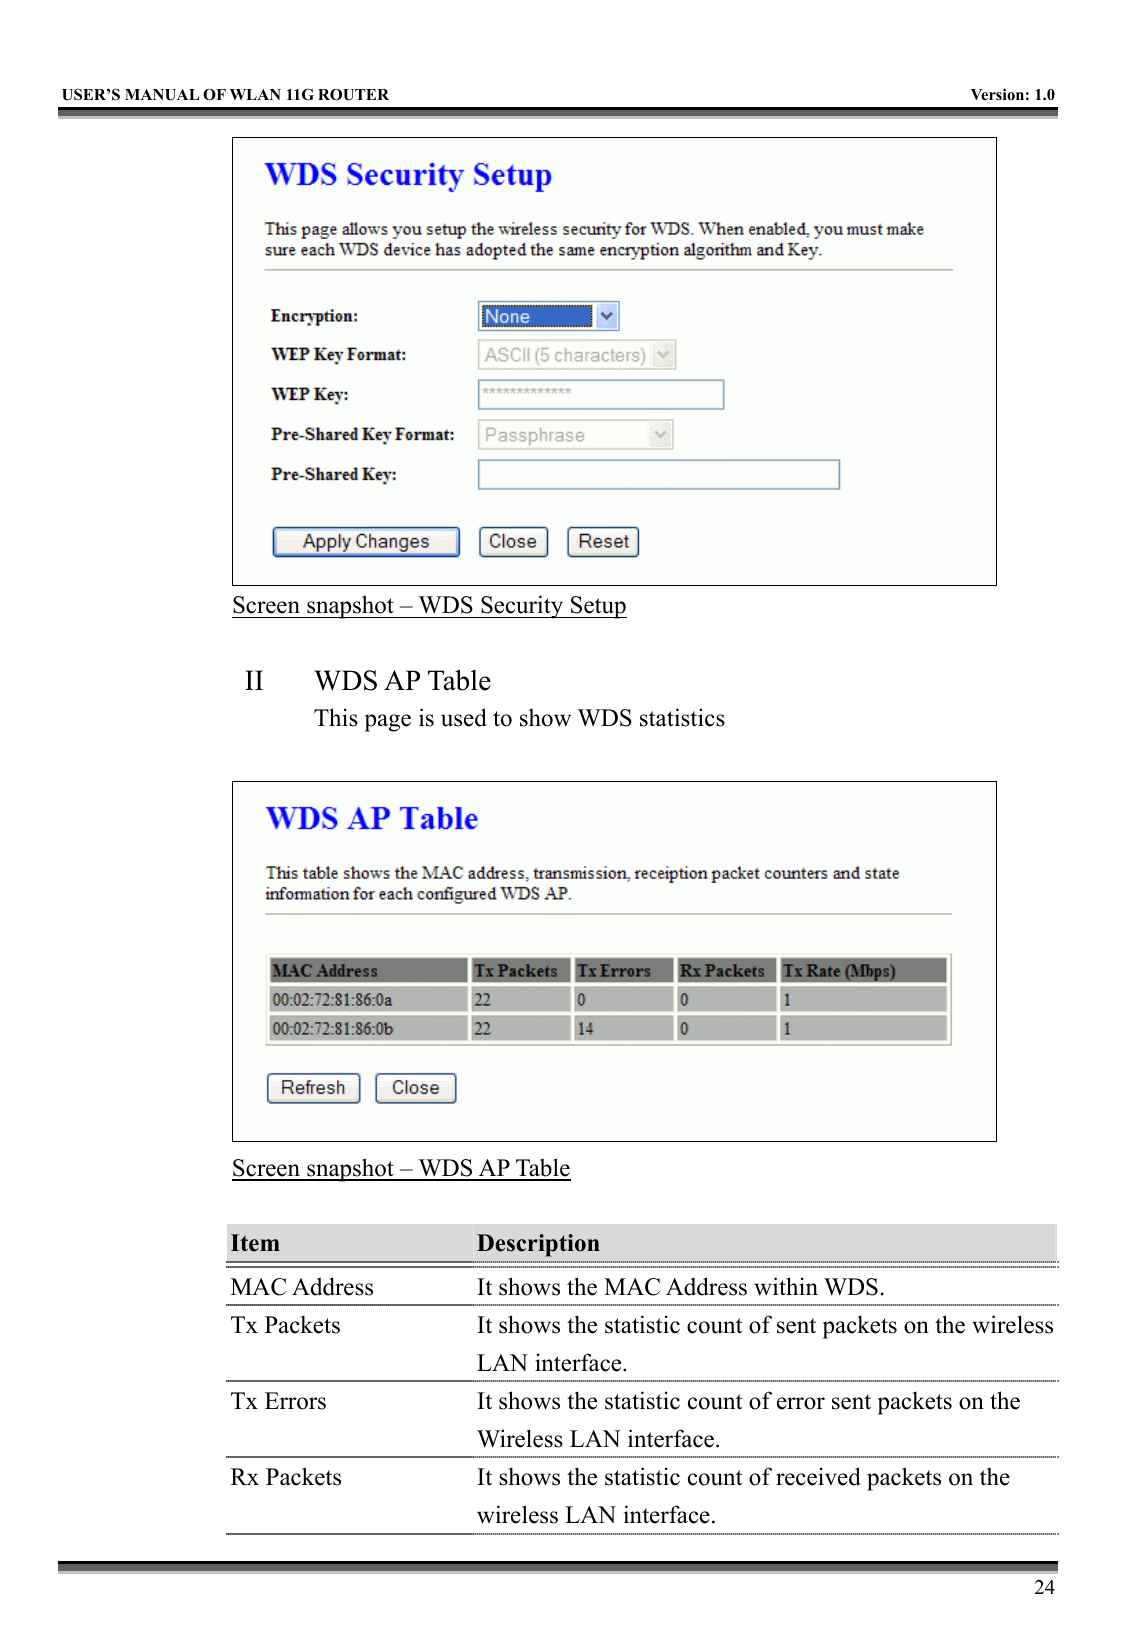   USER’S MANUAL OF WLAN 11G ROUTER    Version: 1.0     24  Screen snapshot – WDS Security Setup  II WDS AP Table This page is used to show WDS statistics   Screen snapshot – WDS AP Table  Item  Description   MAC Address  It shows the MAC Address within WDS. Tx Packets  It shows the statistic count of sent packets on the wireless LAN interface. Tx Errors  It shows the statistic count of error sent packets on the Wireless LAN interface. Rx Packets  It shows the statistic count of received packets on the wireless LAN interface. 